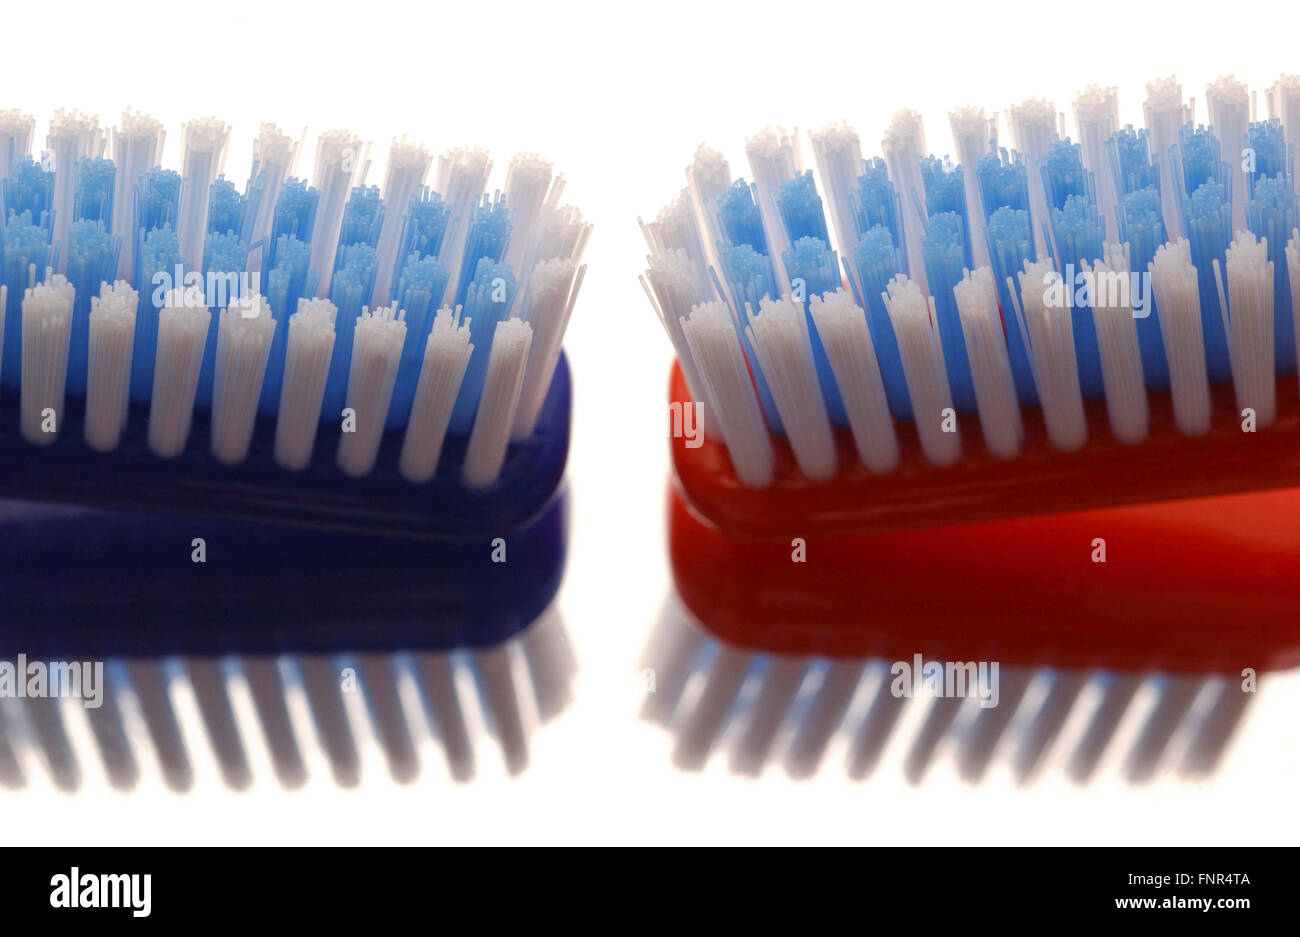 Close-up of two toothbrush heads. Stock Photo